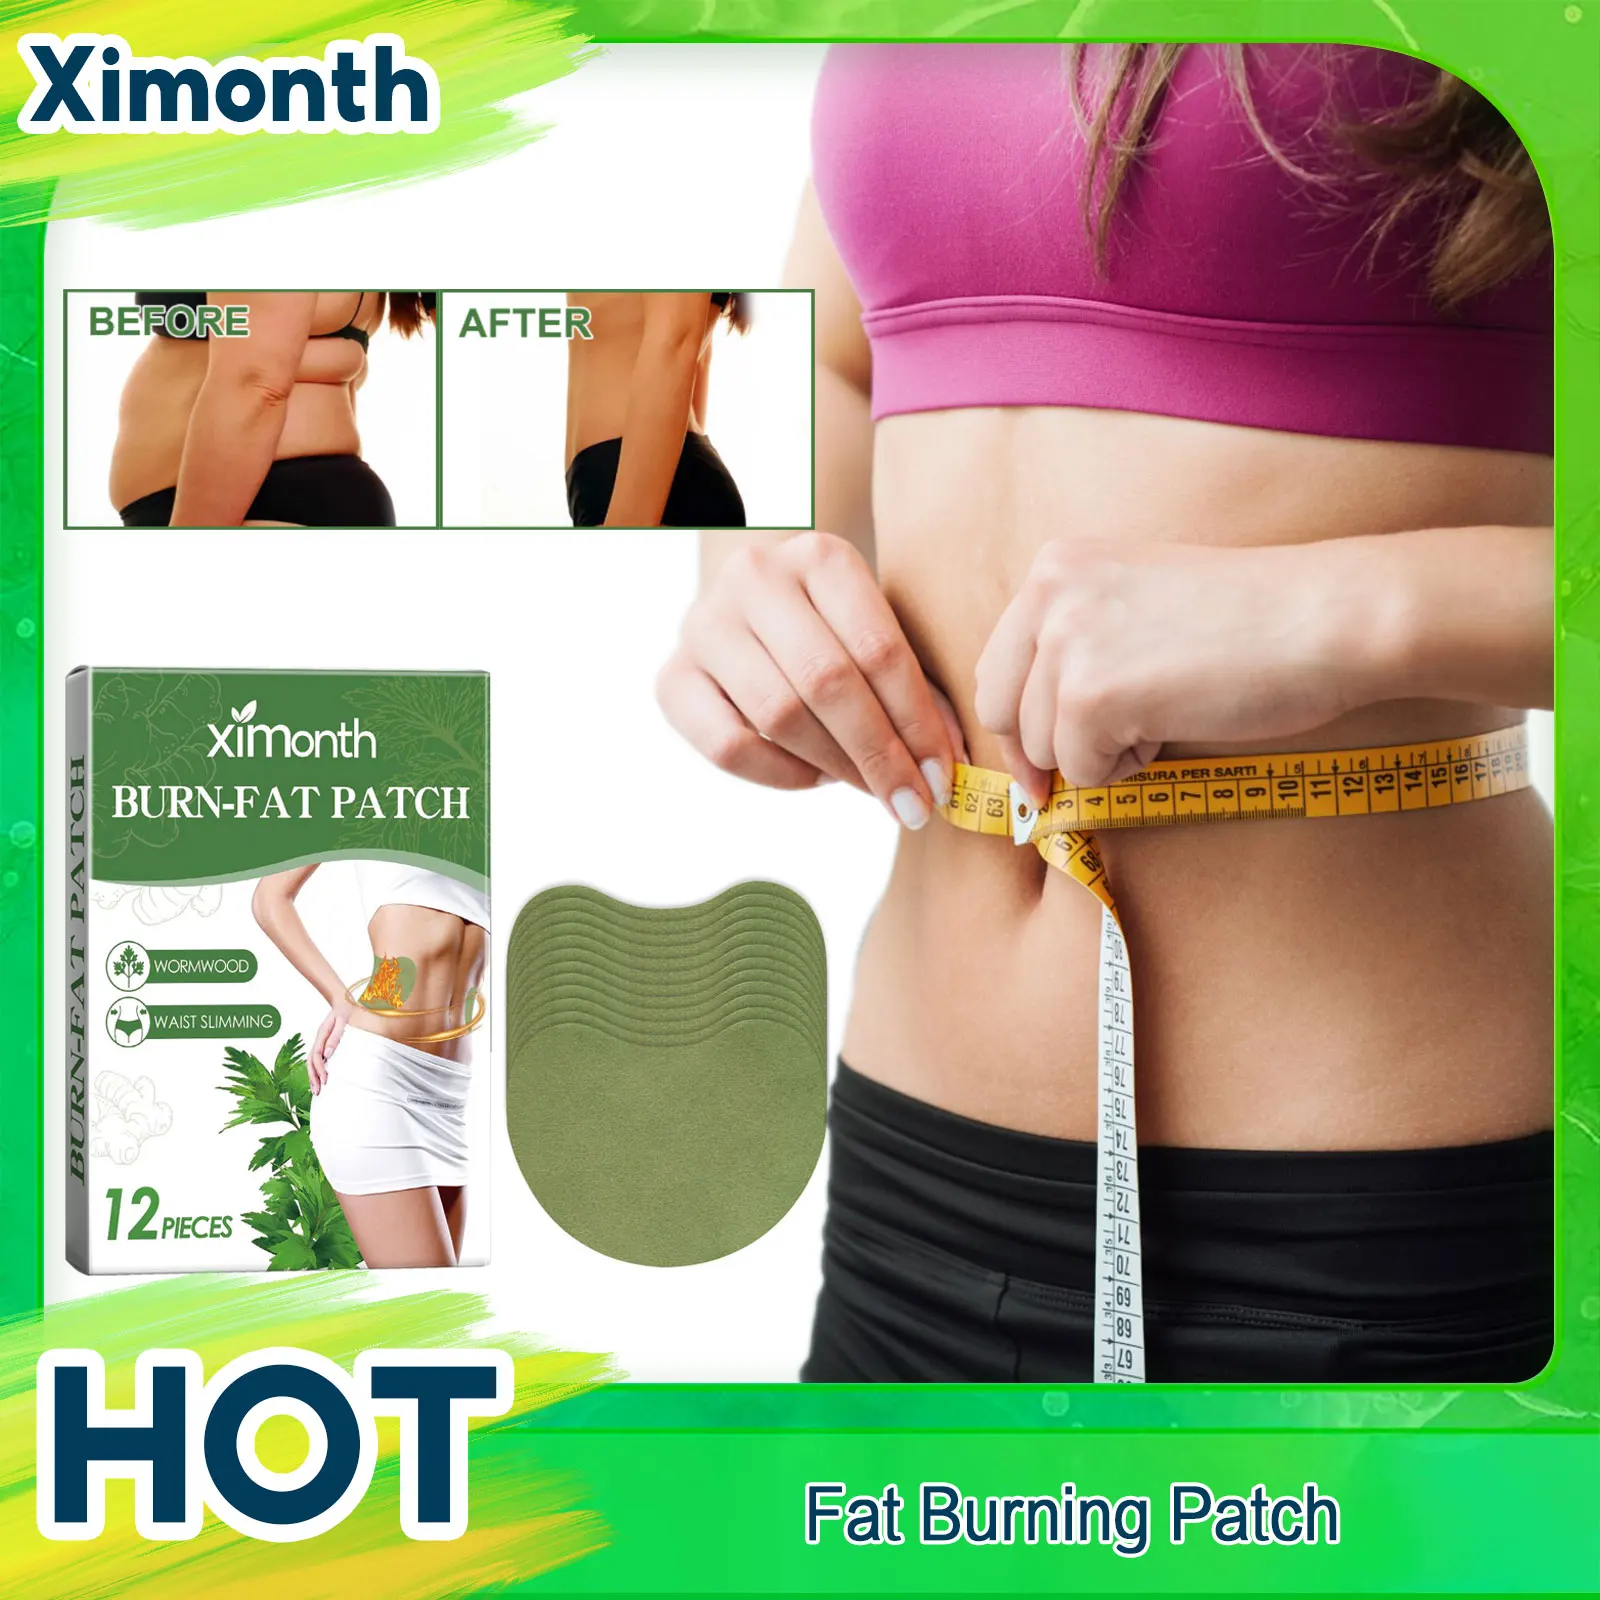 

Fat Burning Patch Increasing Metabolism Belly Detox Abdomen Waist Arm Cellulite Removal Tummy Fat Firming Body Slimming Sticker